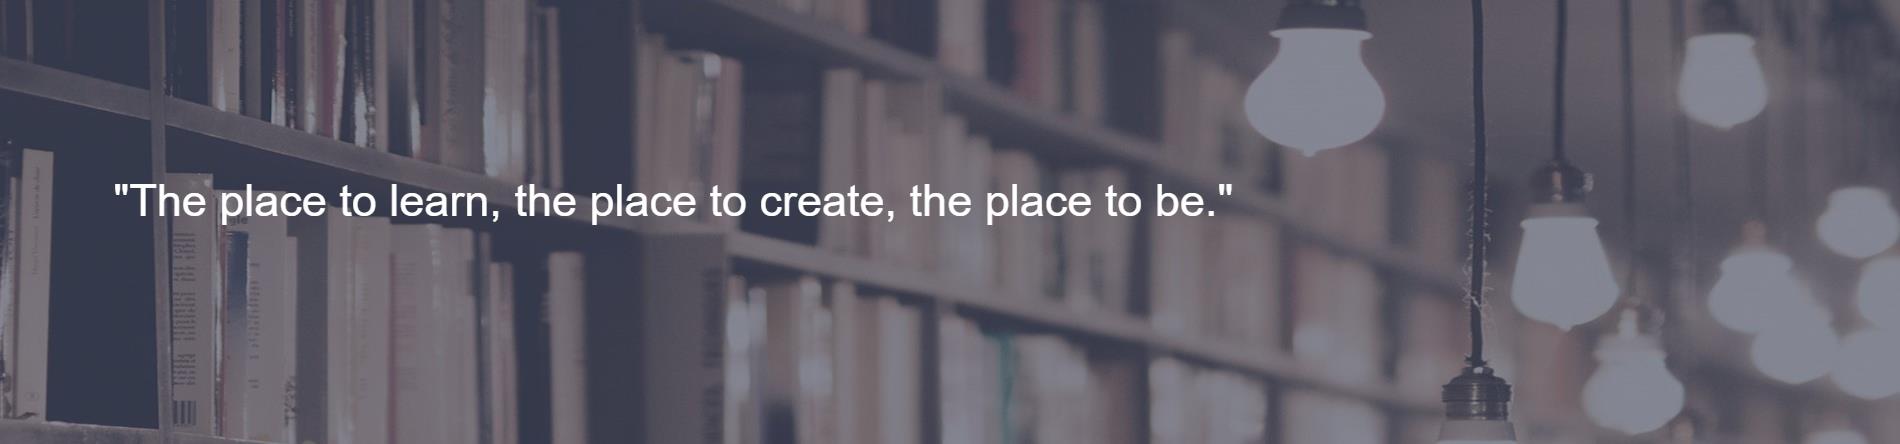 Motto - The Place to learn, the place to create, the place to be